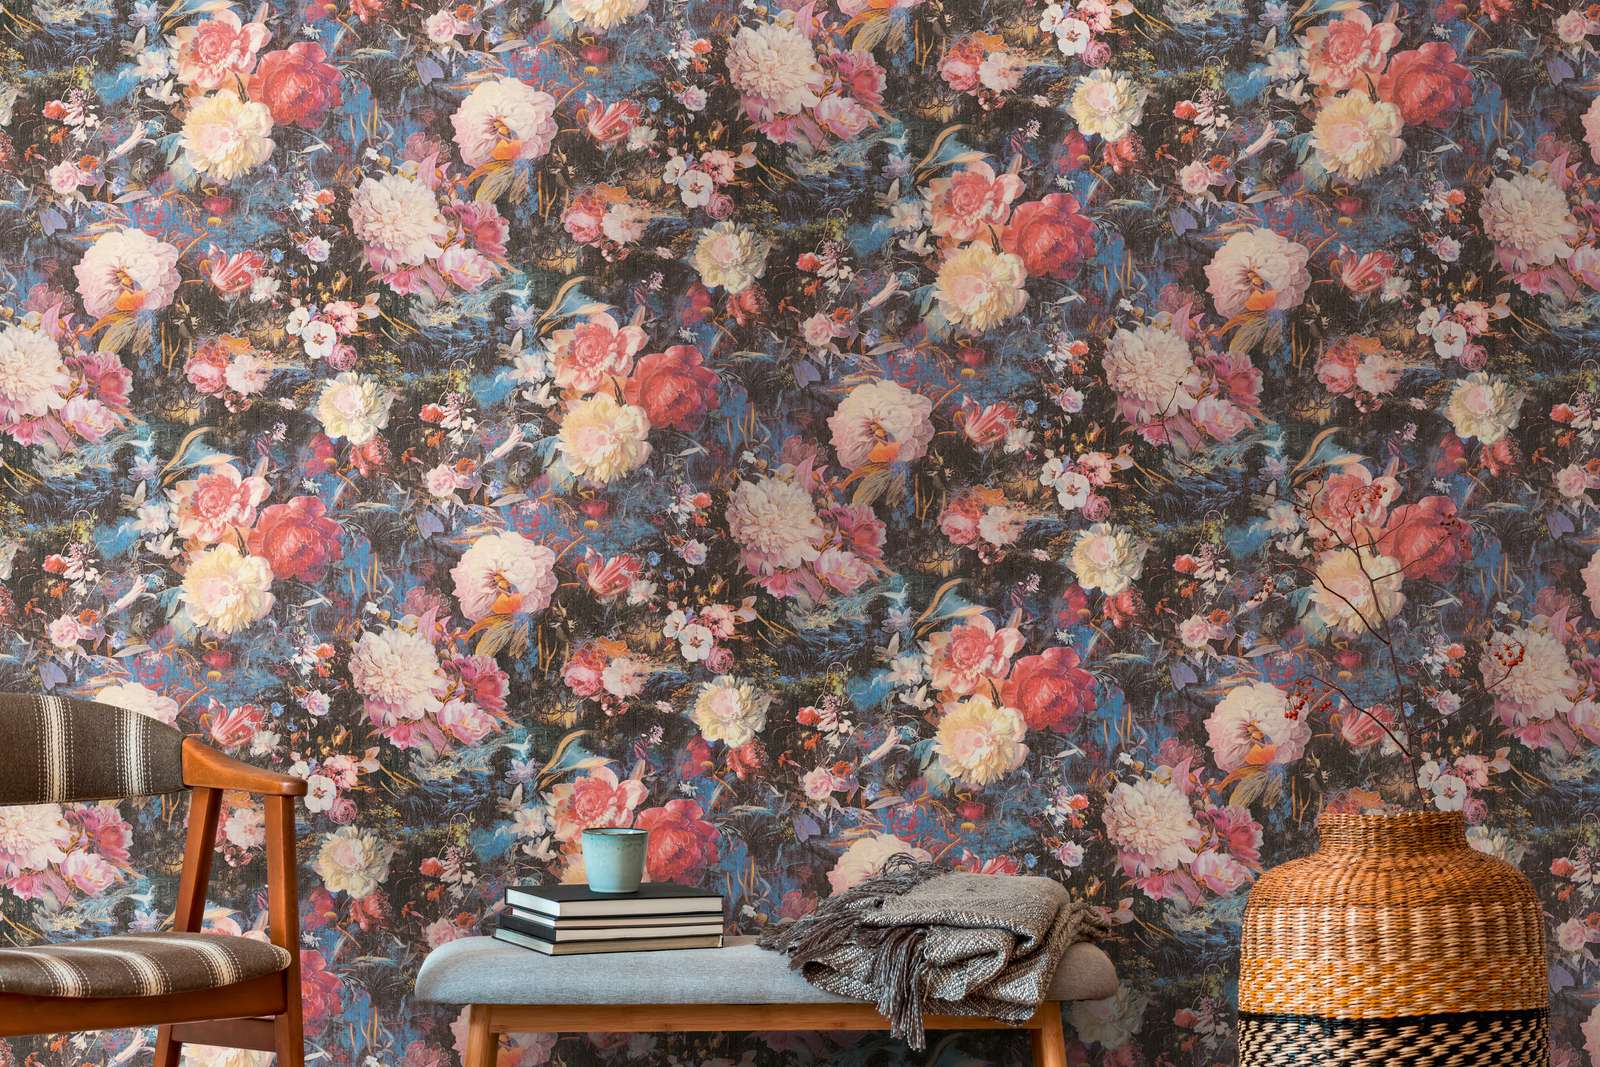             Wallpaper floral design in vintage style - blue, yellow
        